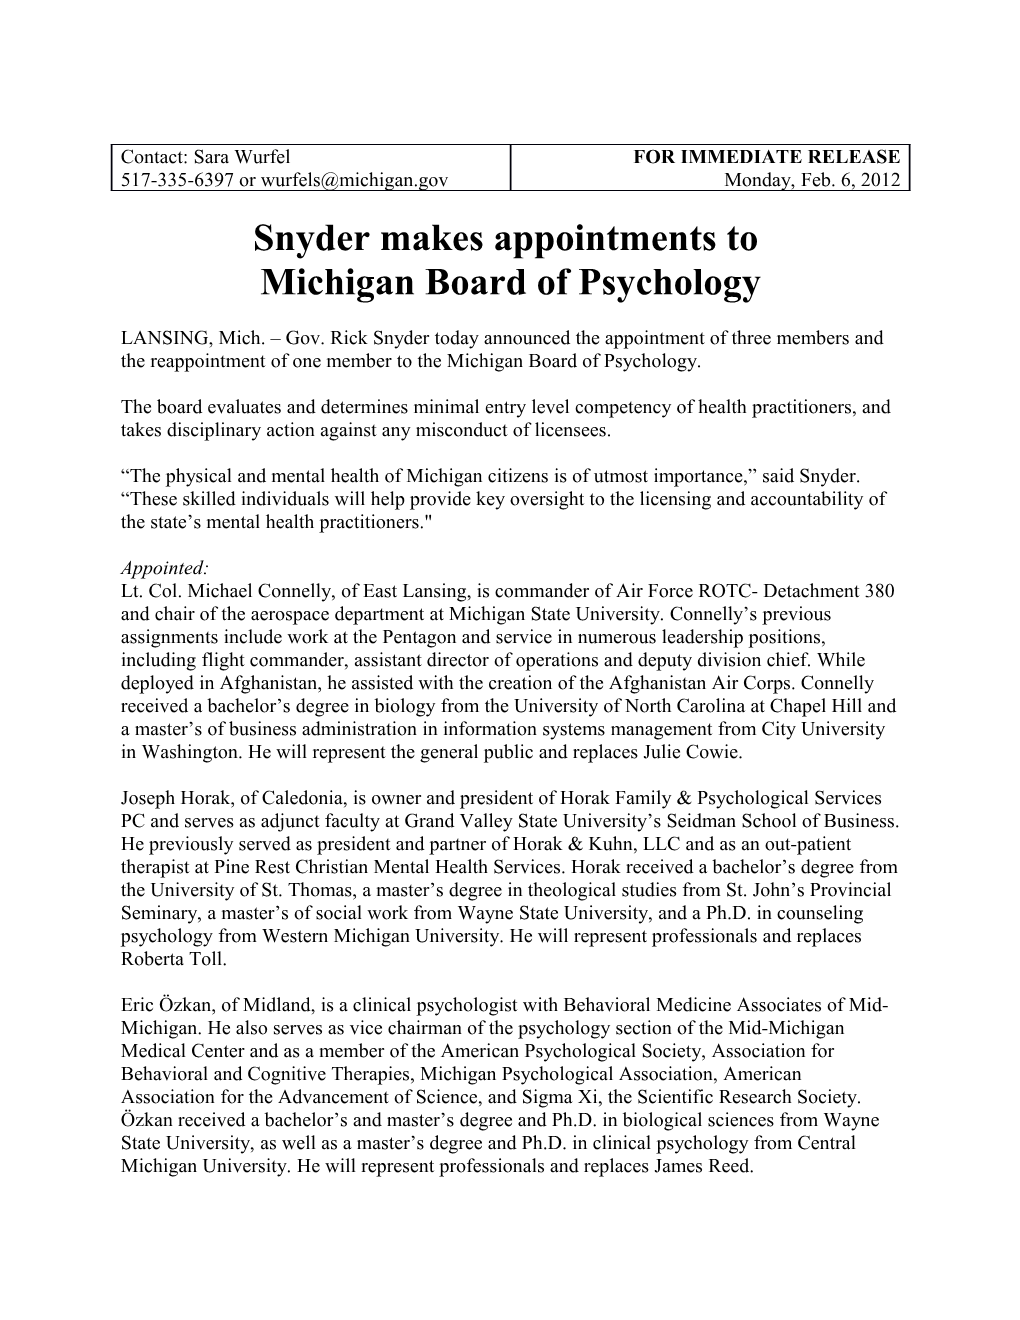 Snyder Makes Appointments To